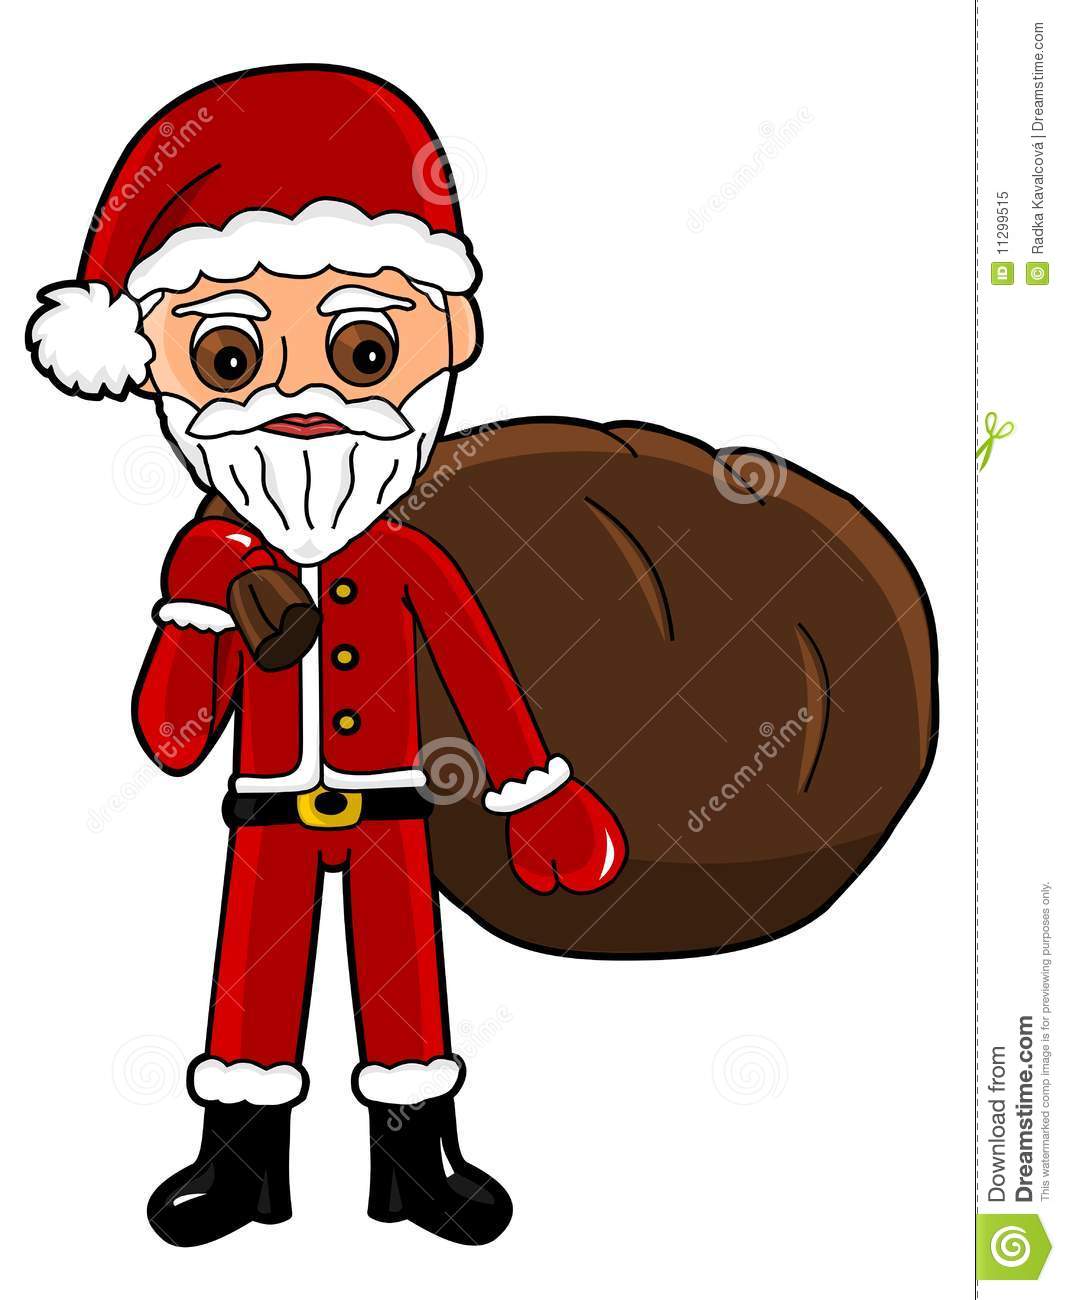 More Similar Stock Images Of   Santa Claus Christmas Clipart